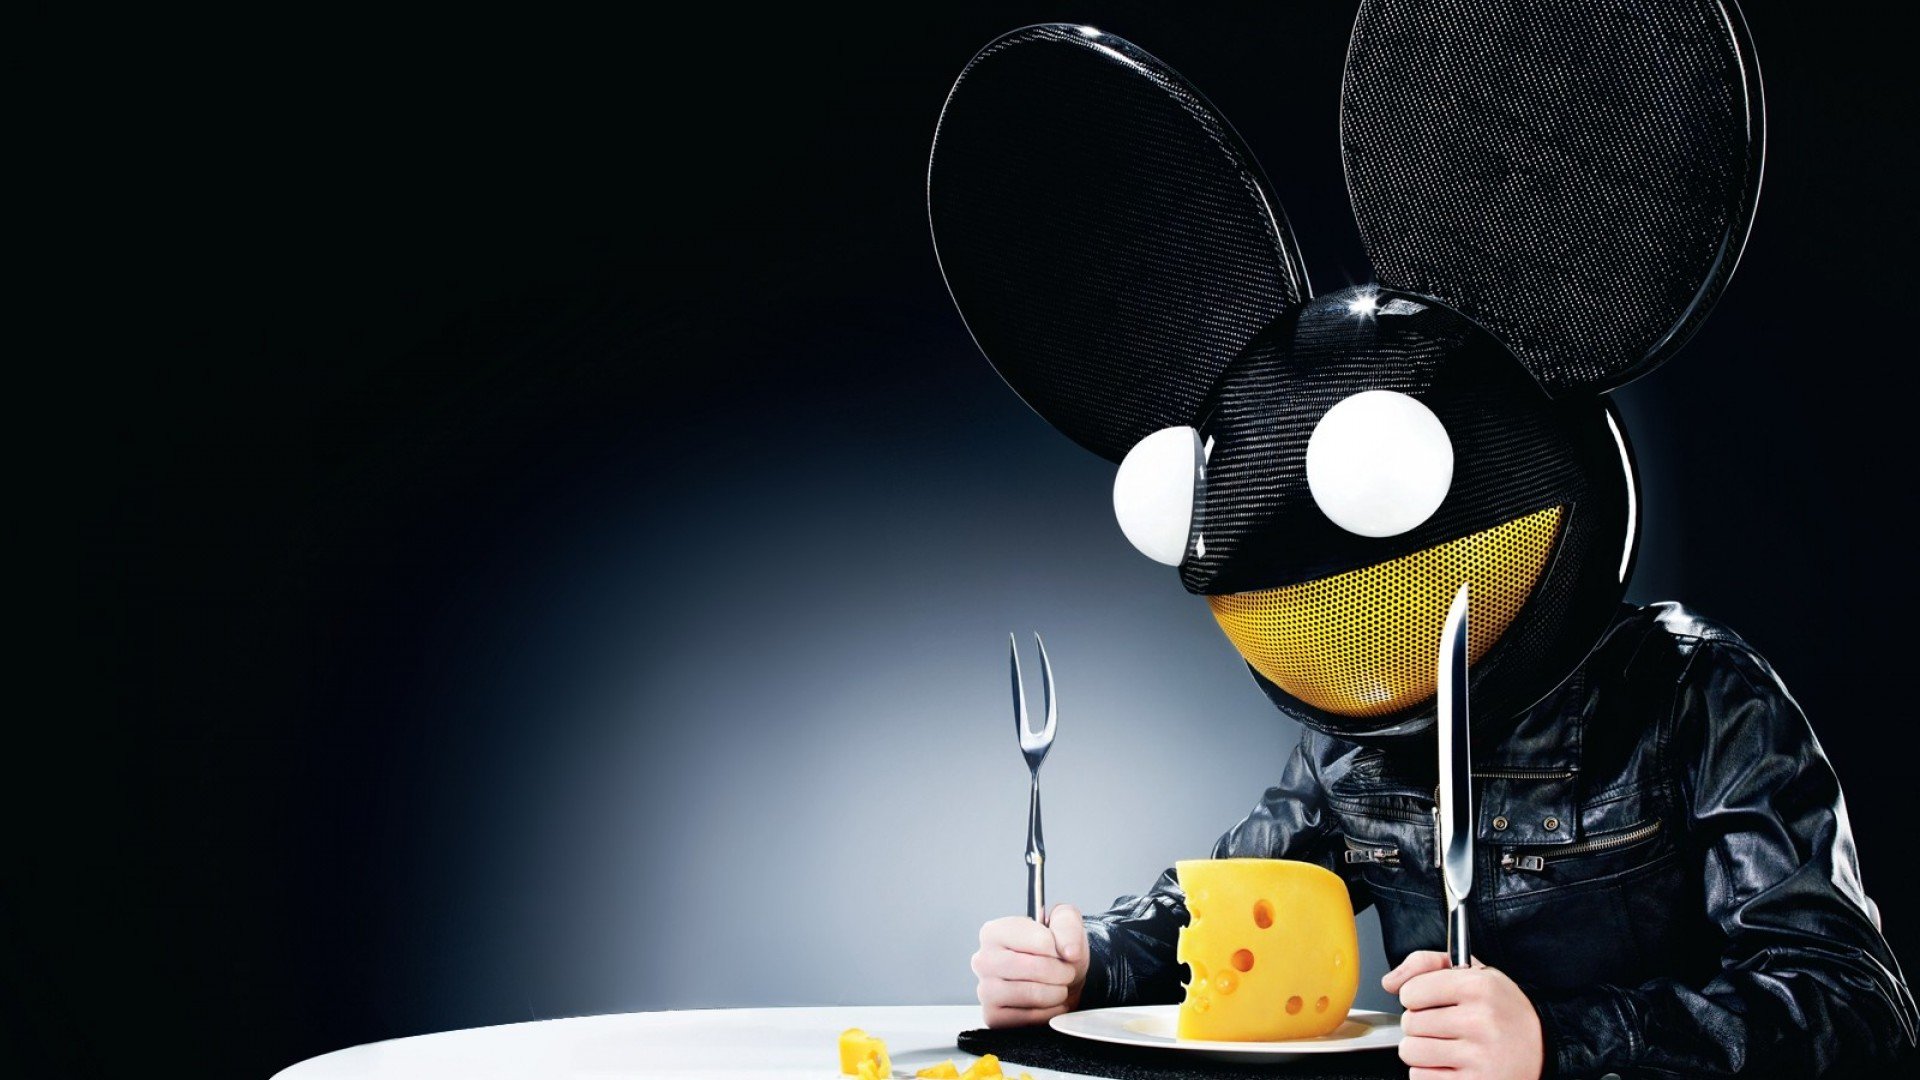 Deadmau5 Releases The Finished Collaboration With Grabbitz